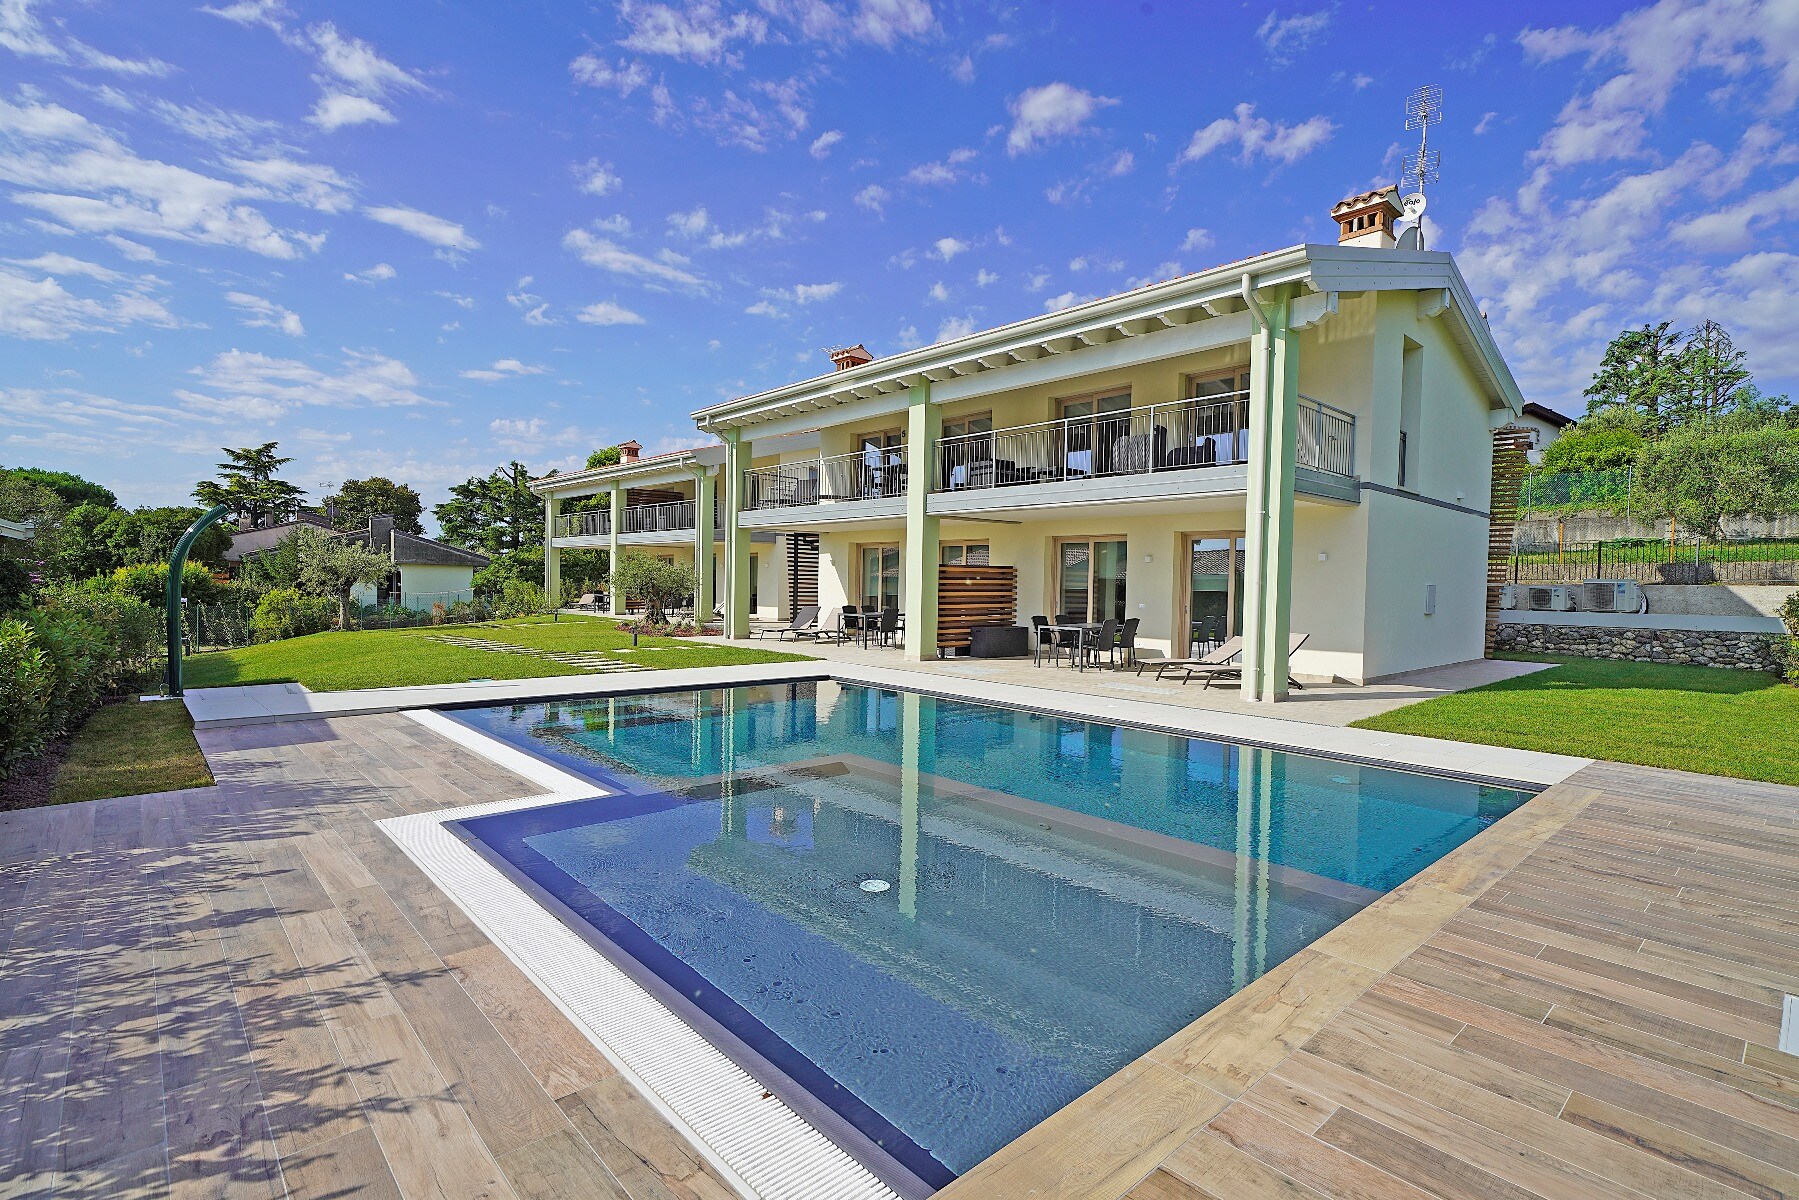 Property Image 1 - Modern and spacious house with pool in Manerba del Garda (2)